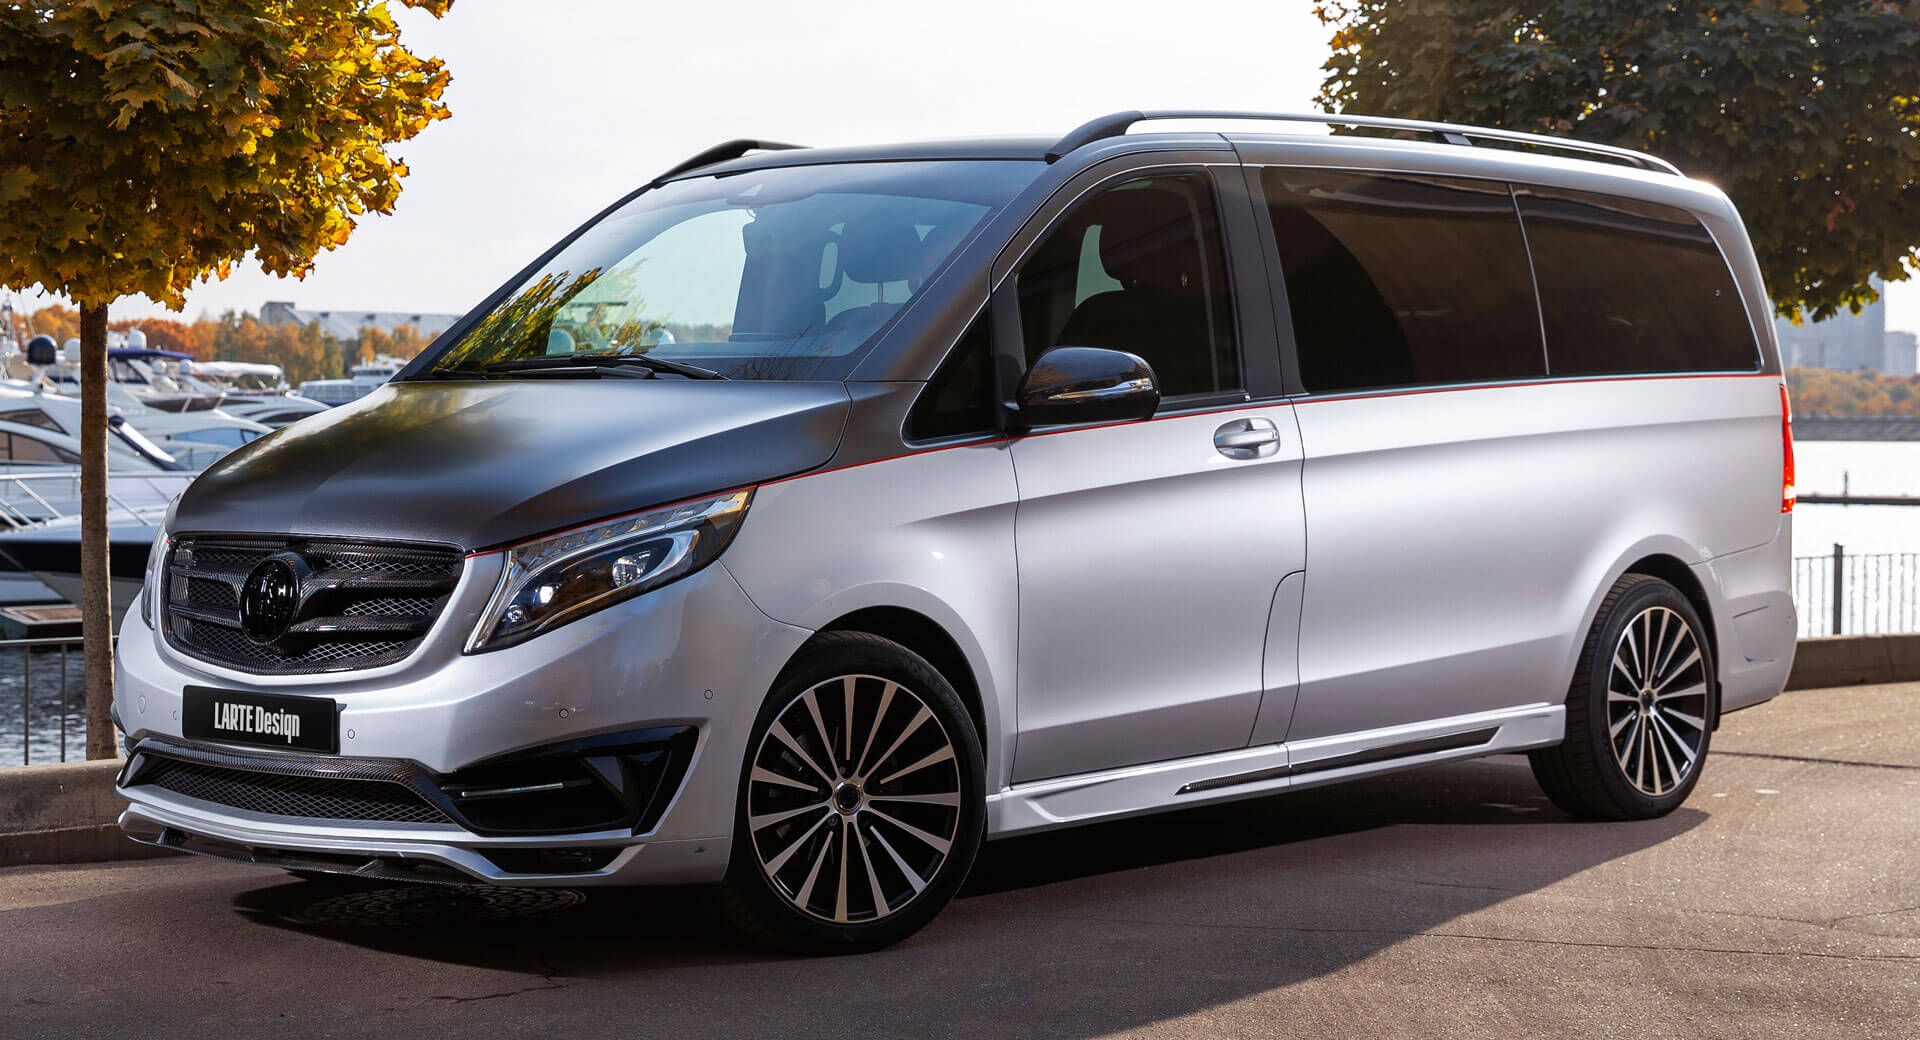 Is The Mercedes V-Class Minivan Too Bland For You? Larte Design Has A  Solution